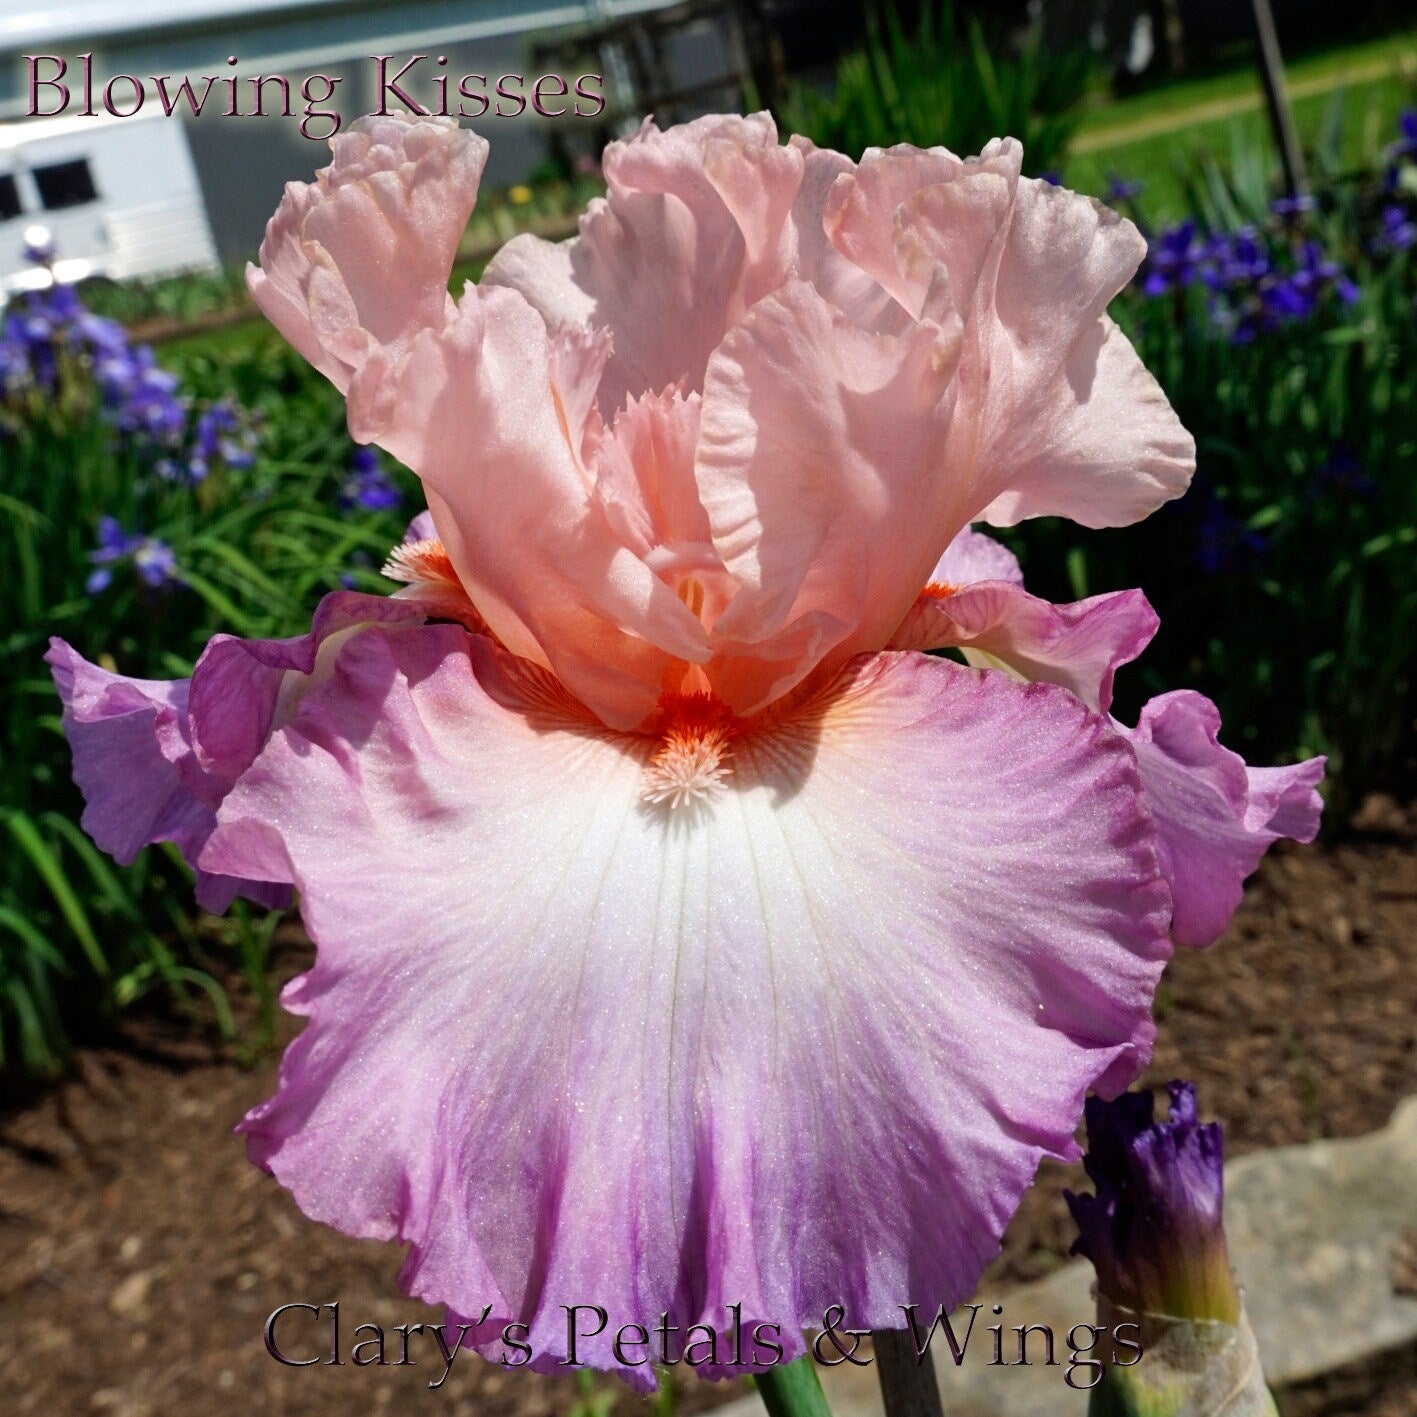 Blowing Kisses - Tall Bearded Iris - Orchid Pink